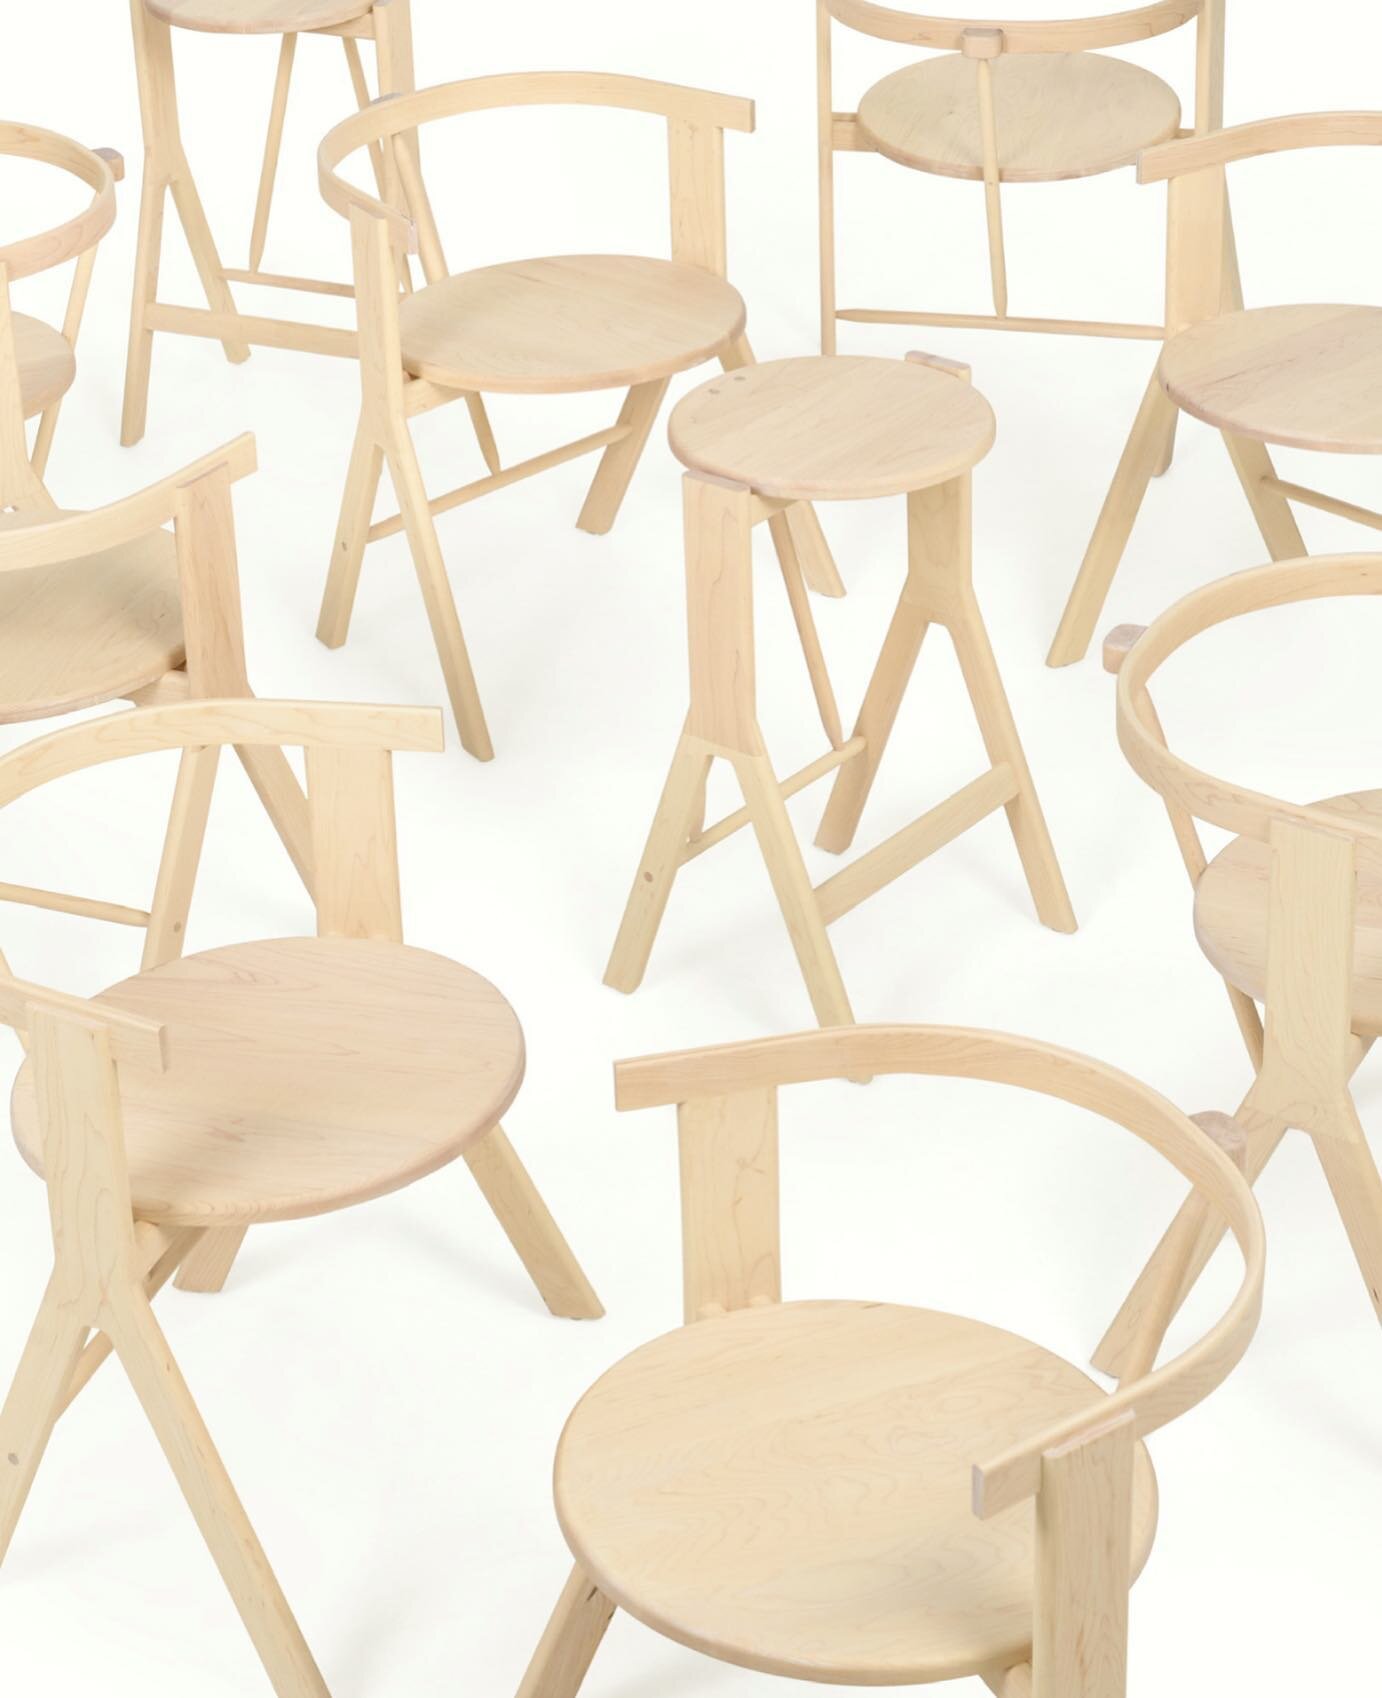 E1 Chairs and 650 Stools. Made in solid American Rock Maple.